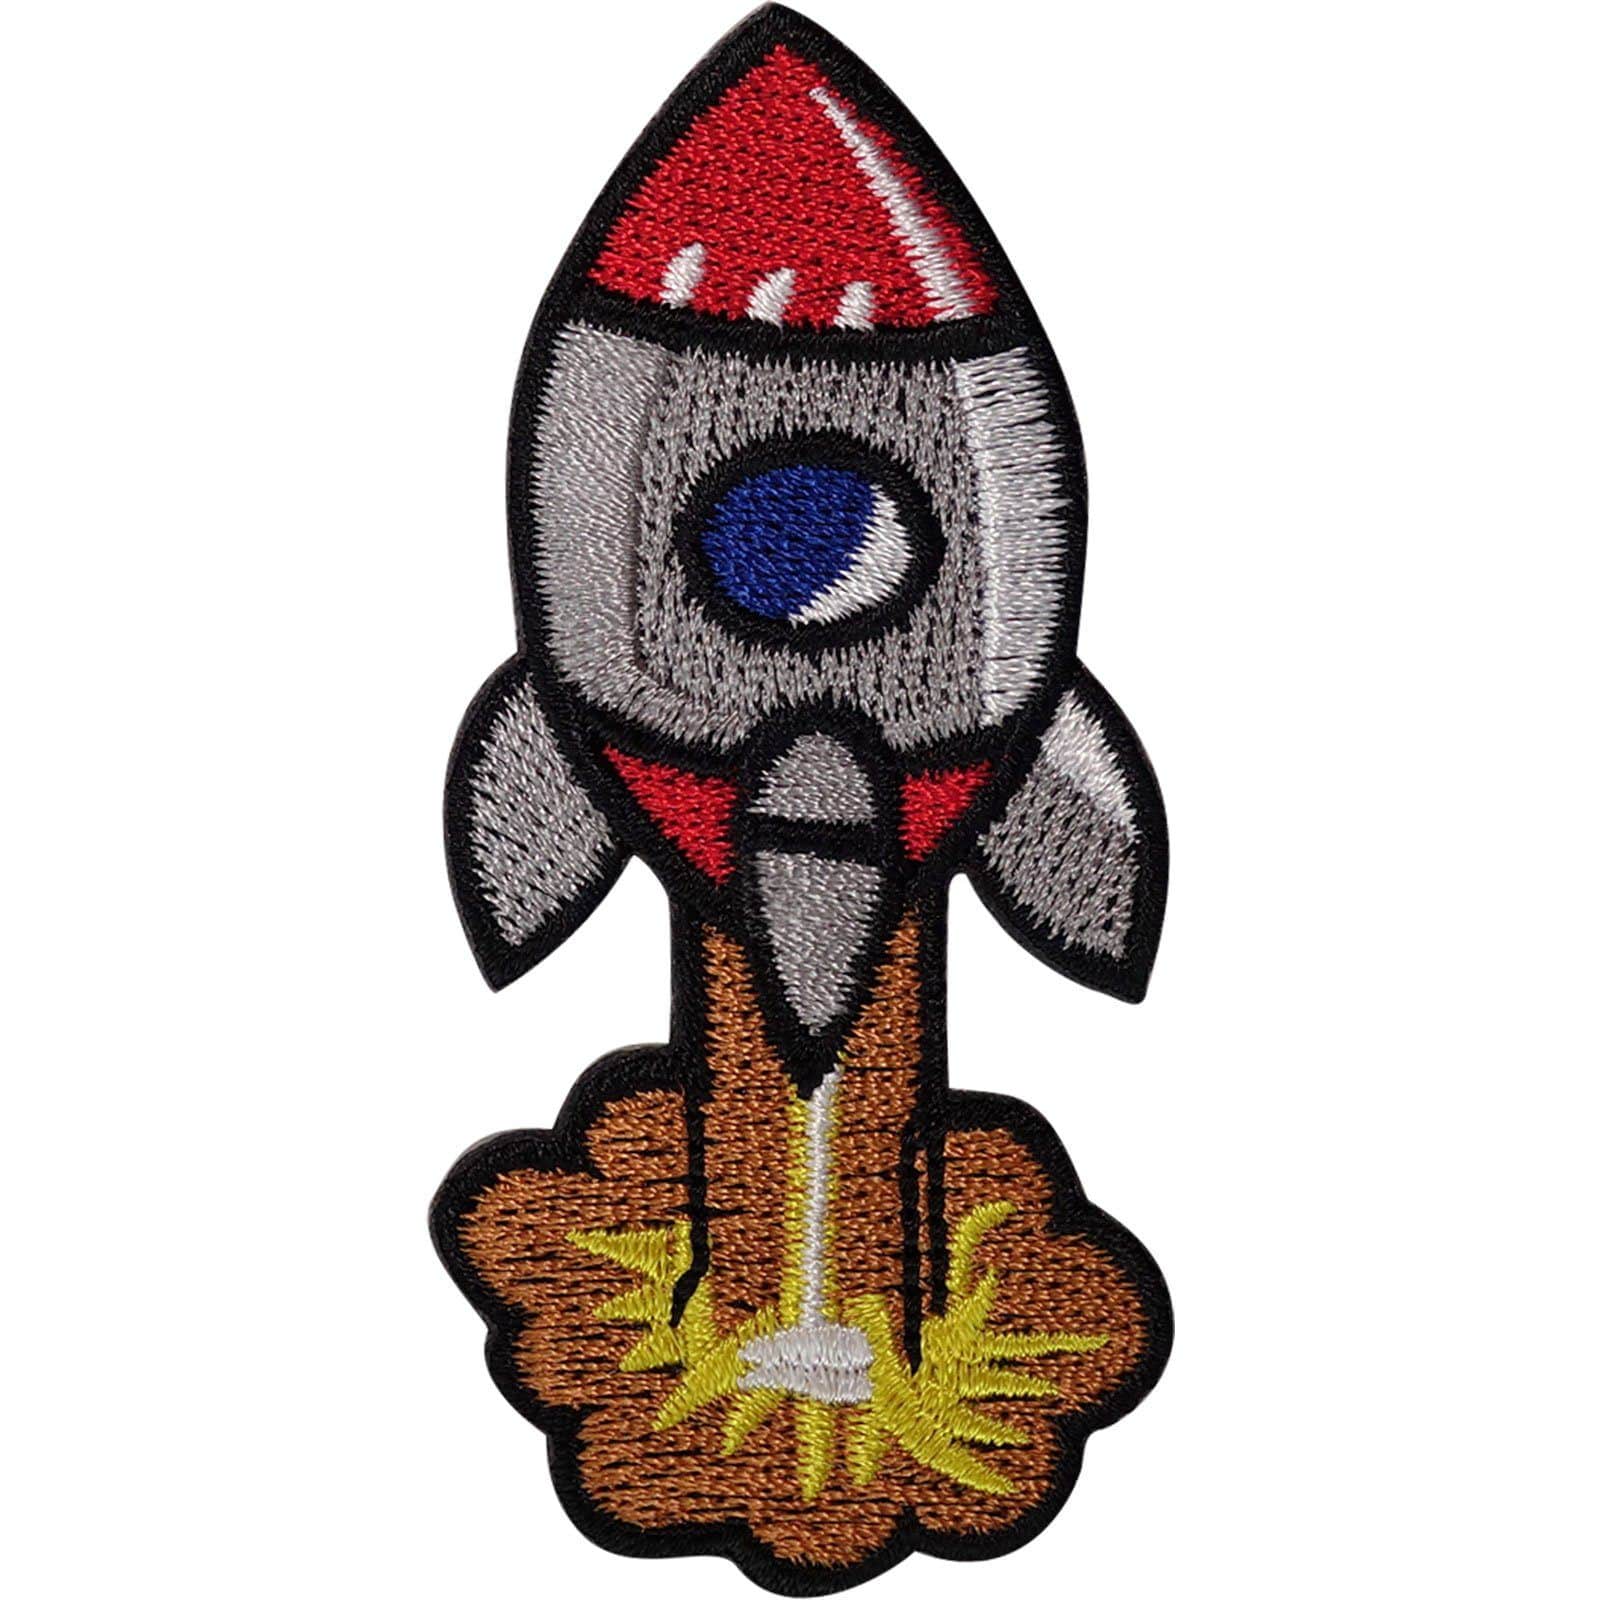 Rocket Patch Iron Sew On Cloth Space NASA Embroidered Badge Embroidery Applique